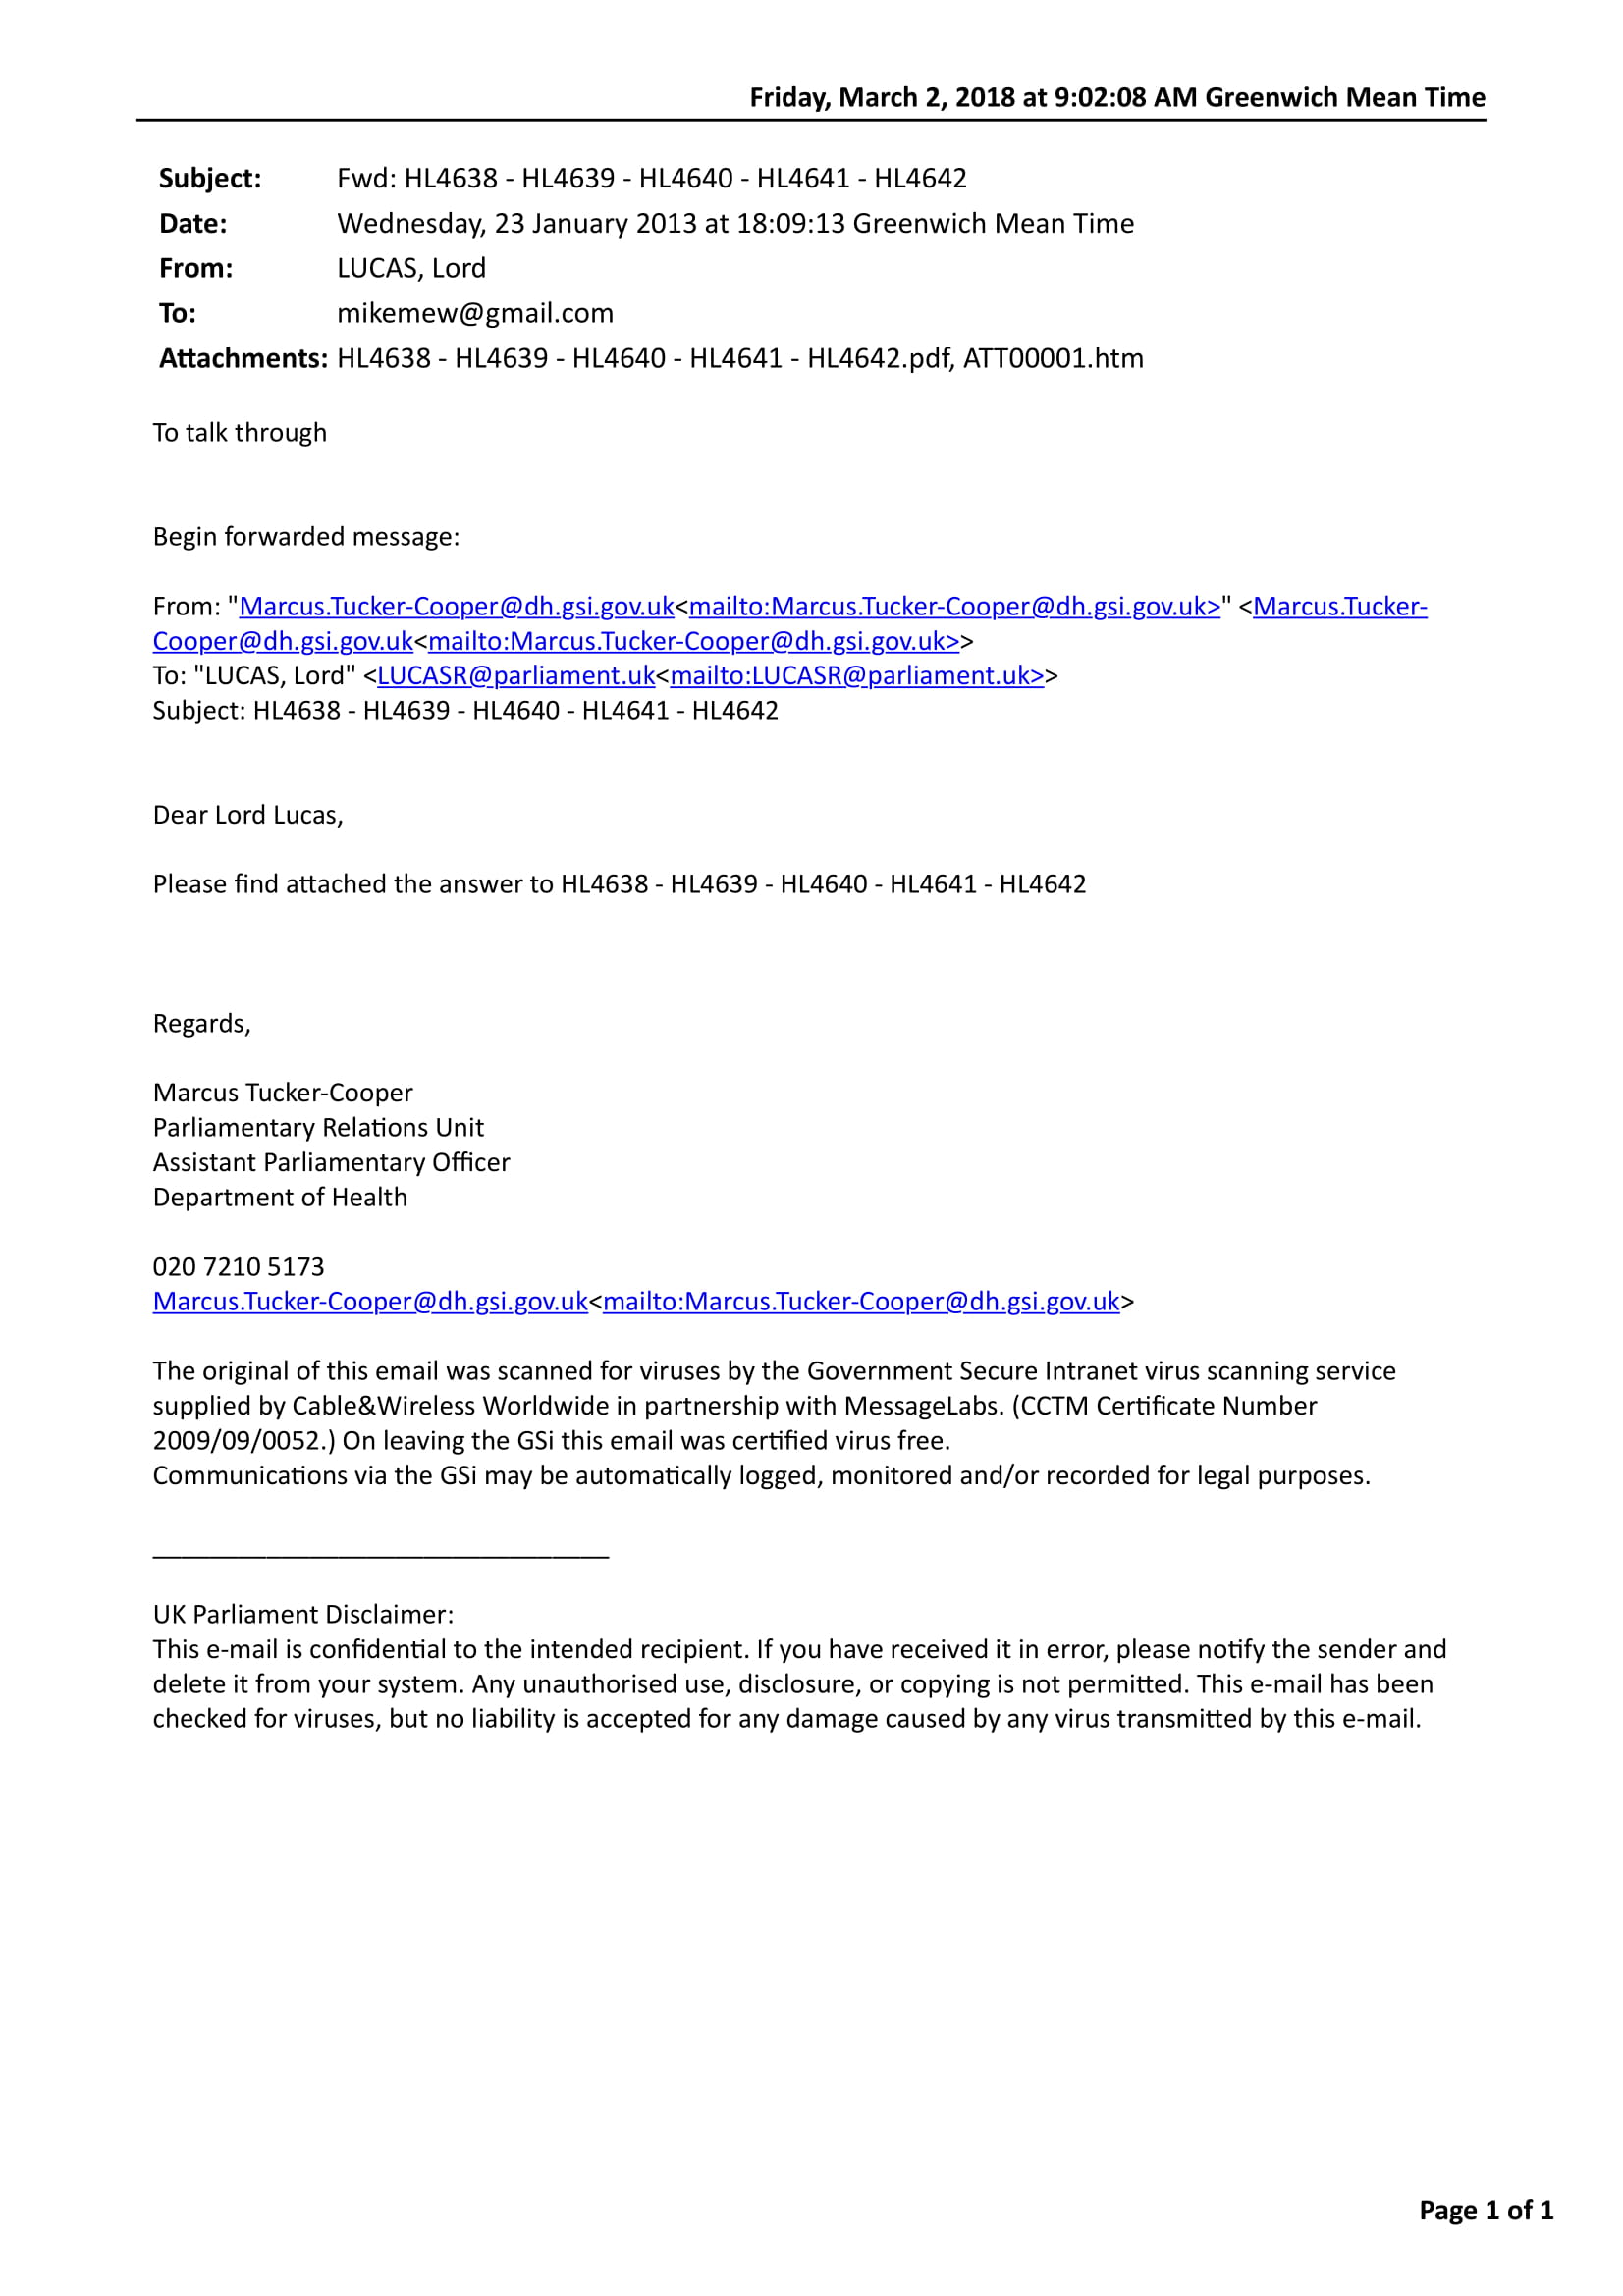 2013/01/23 A Email from Lord Lucas forwarding email form Marcus Tucker-Cooper